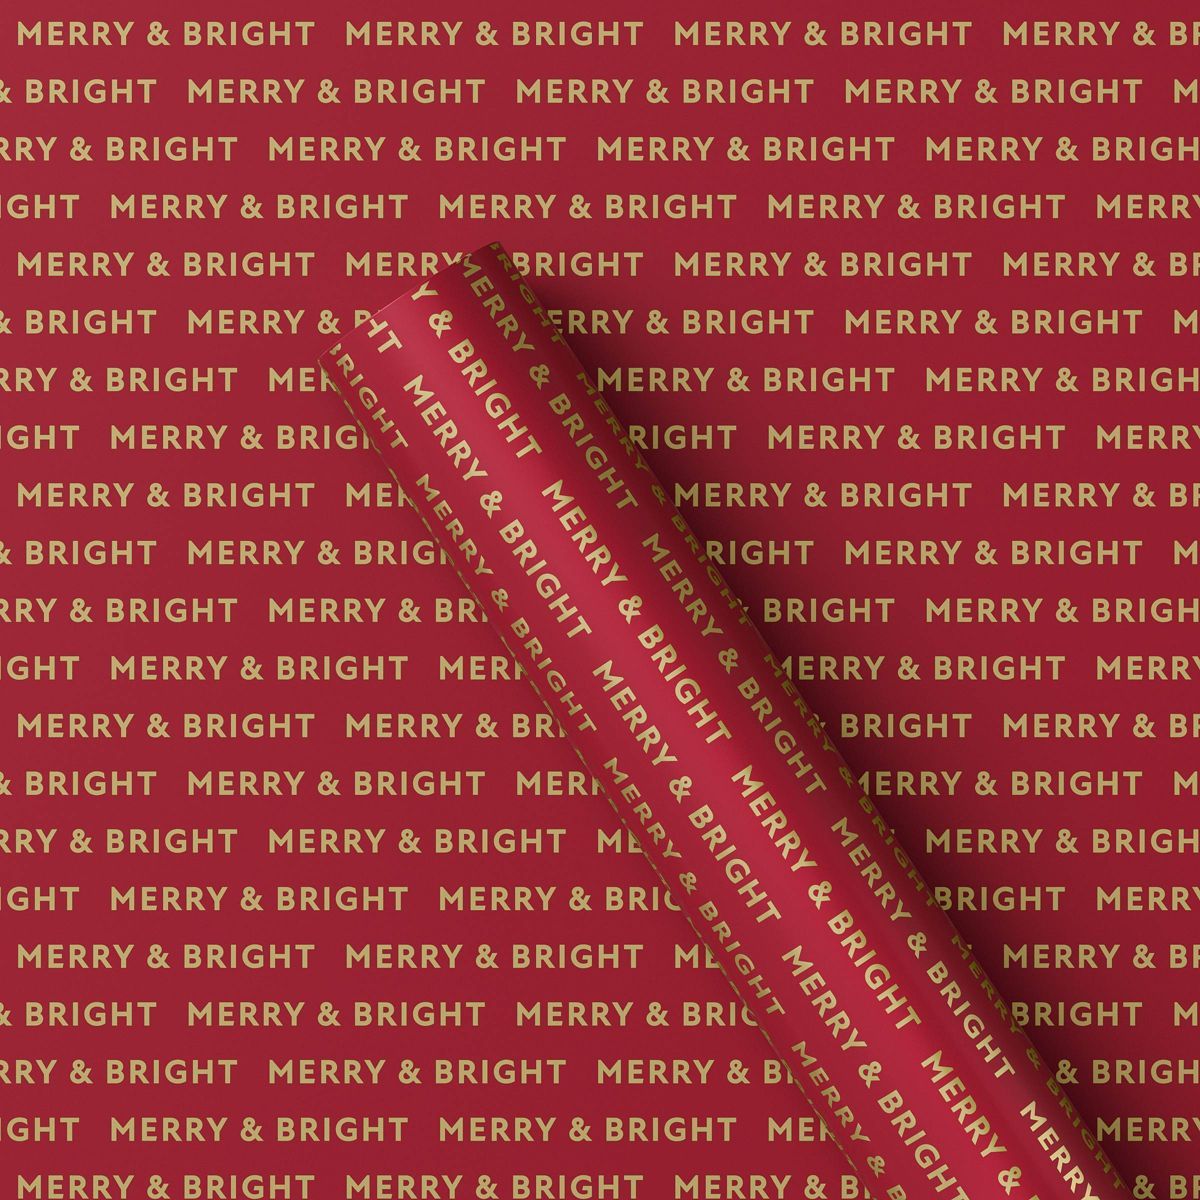 25 sq ft 'Merry & Bright' Christmas Gift Wrap Red/Gold - Wondershop™ | Target